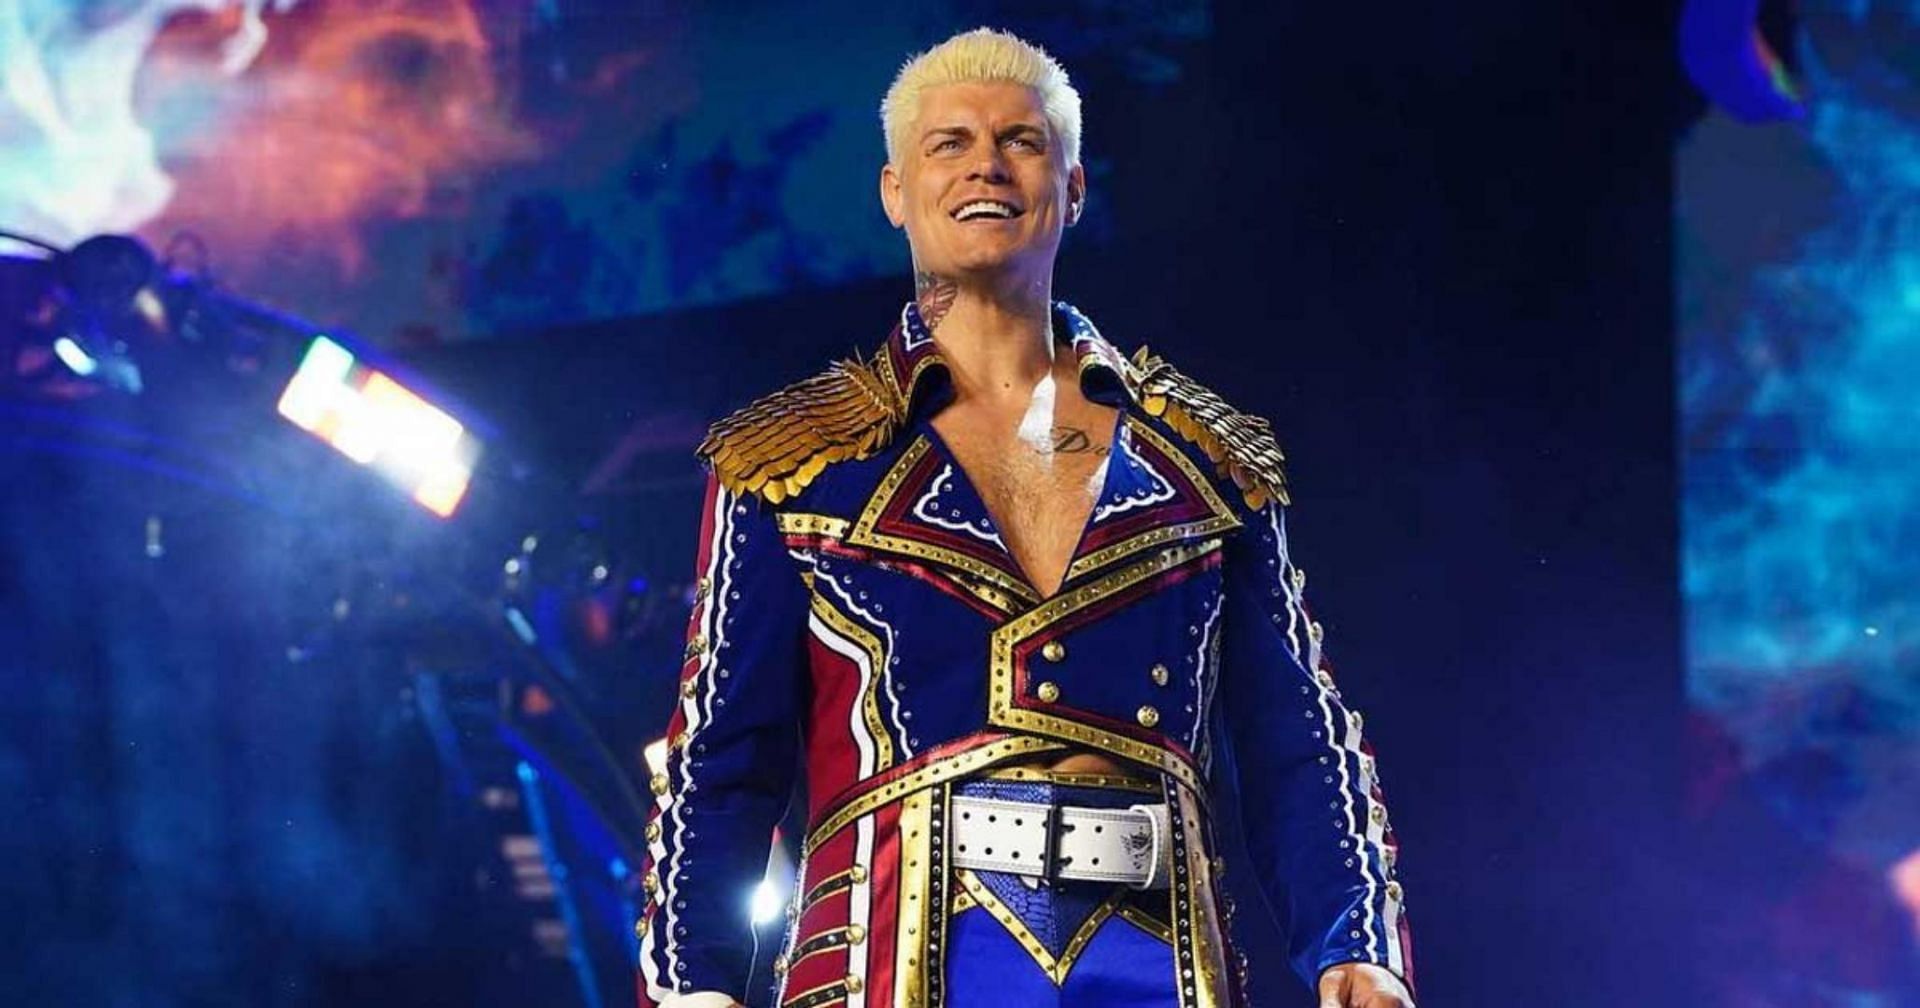 Cody Rhodes may not be joining WWE after all.